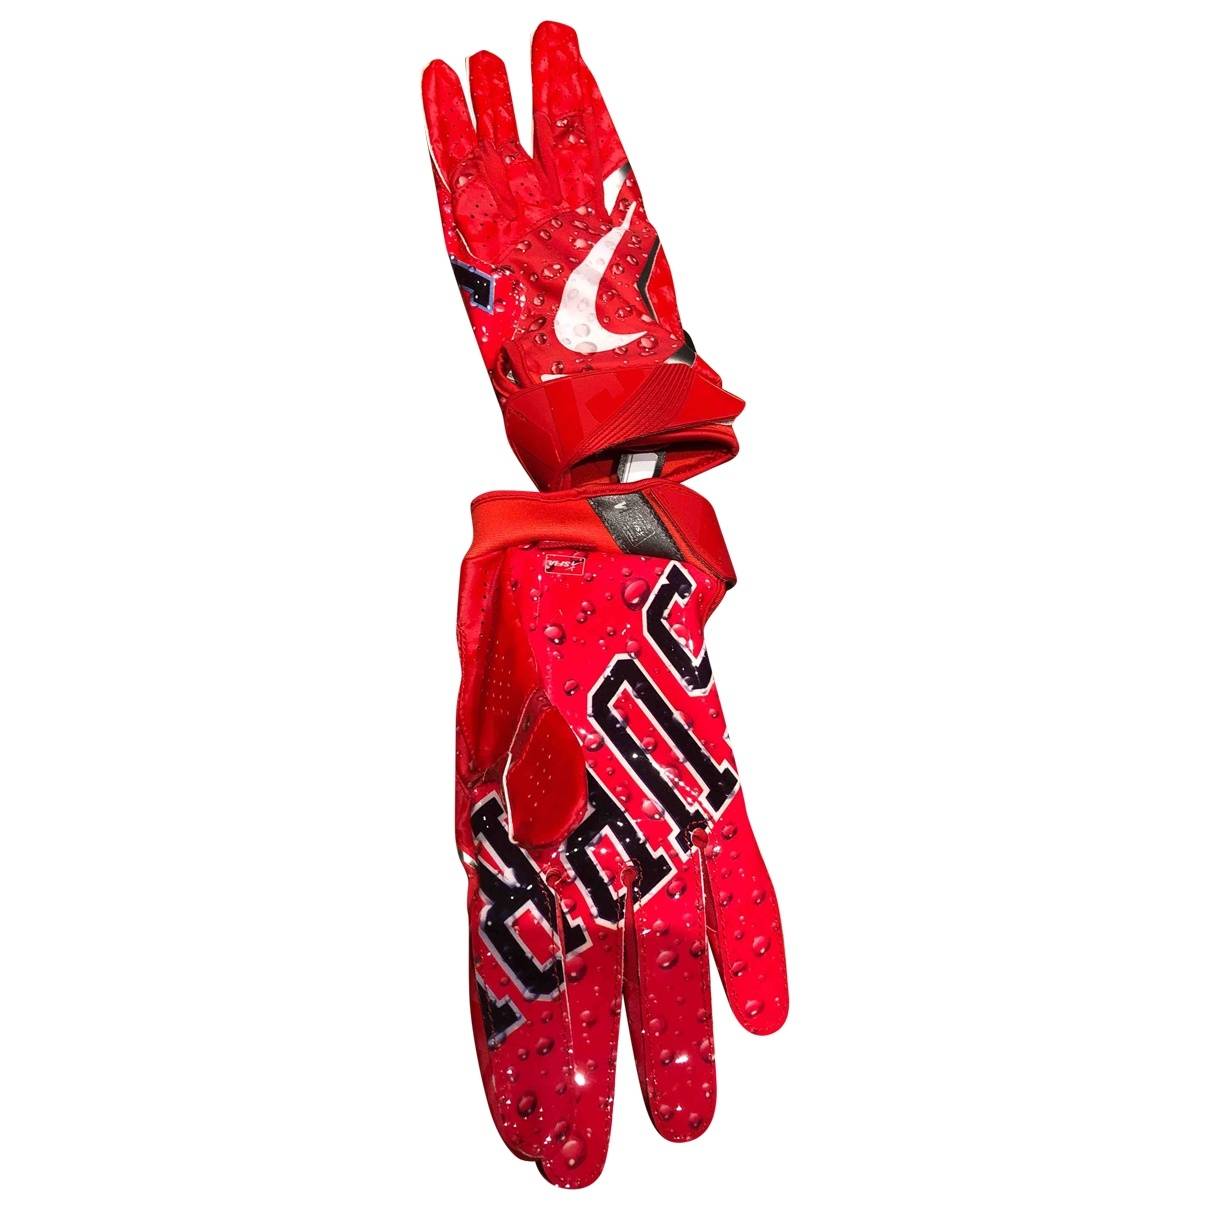 Gloves Nike x Supreme Red size M International in Synthetic - 8961357